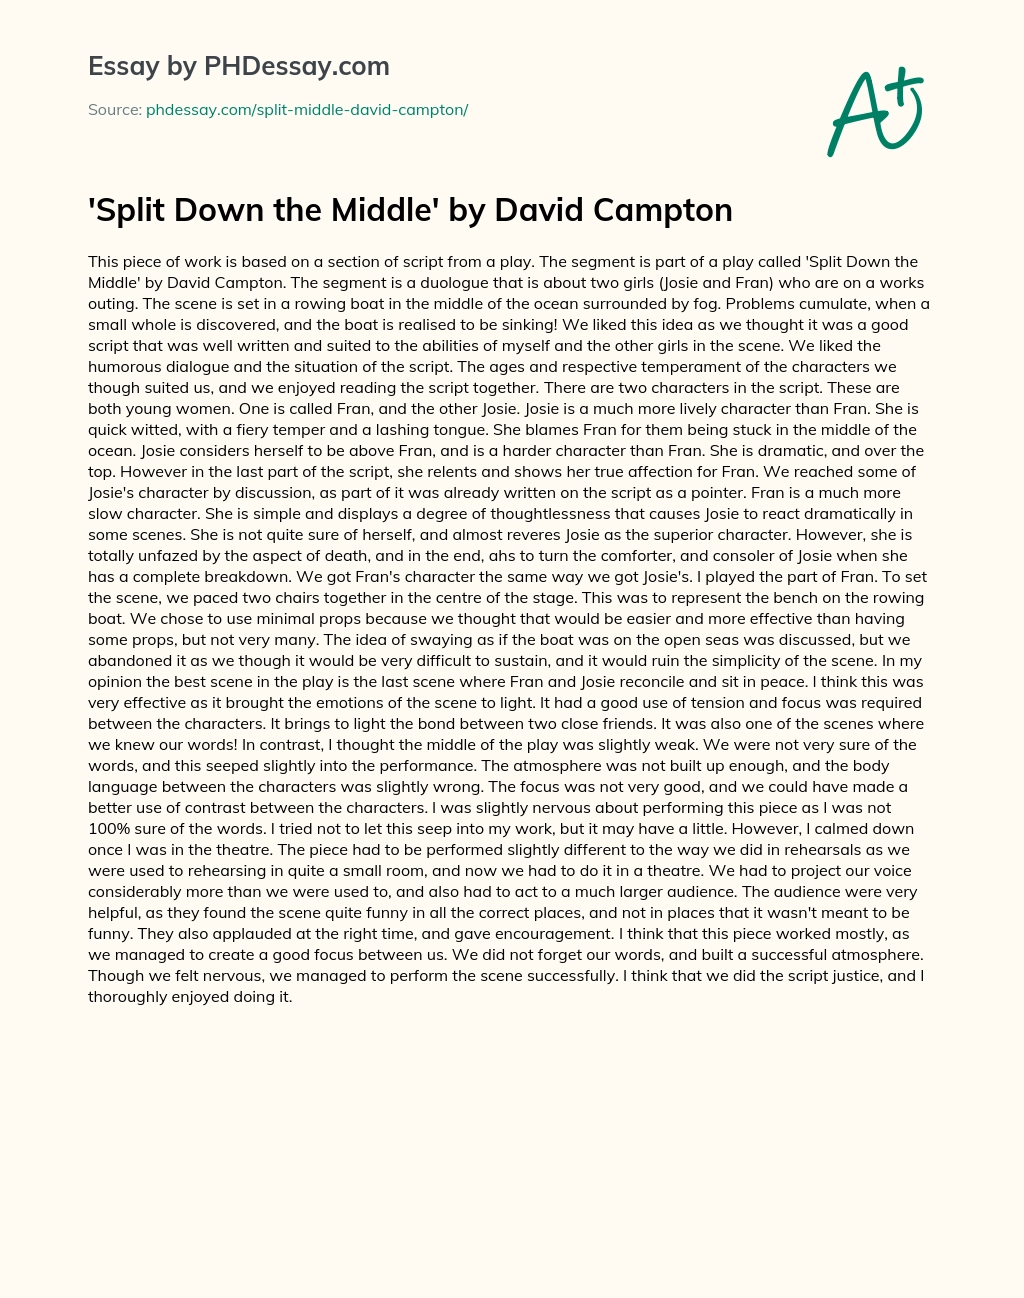 Split Down the Middle by David Campton essay